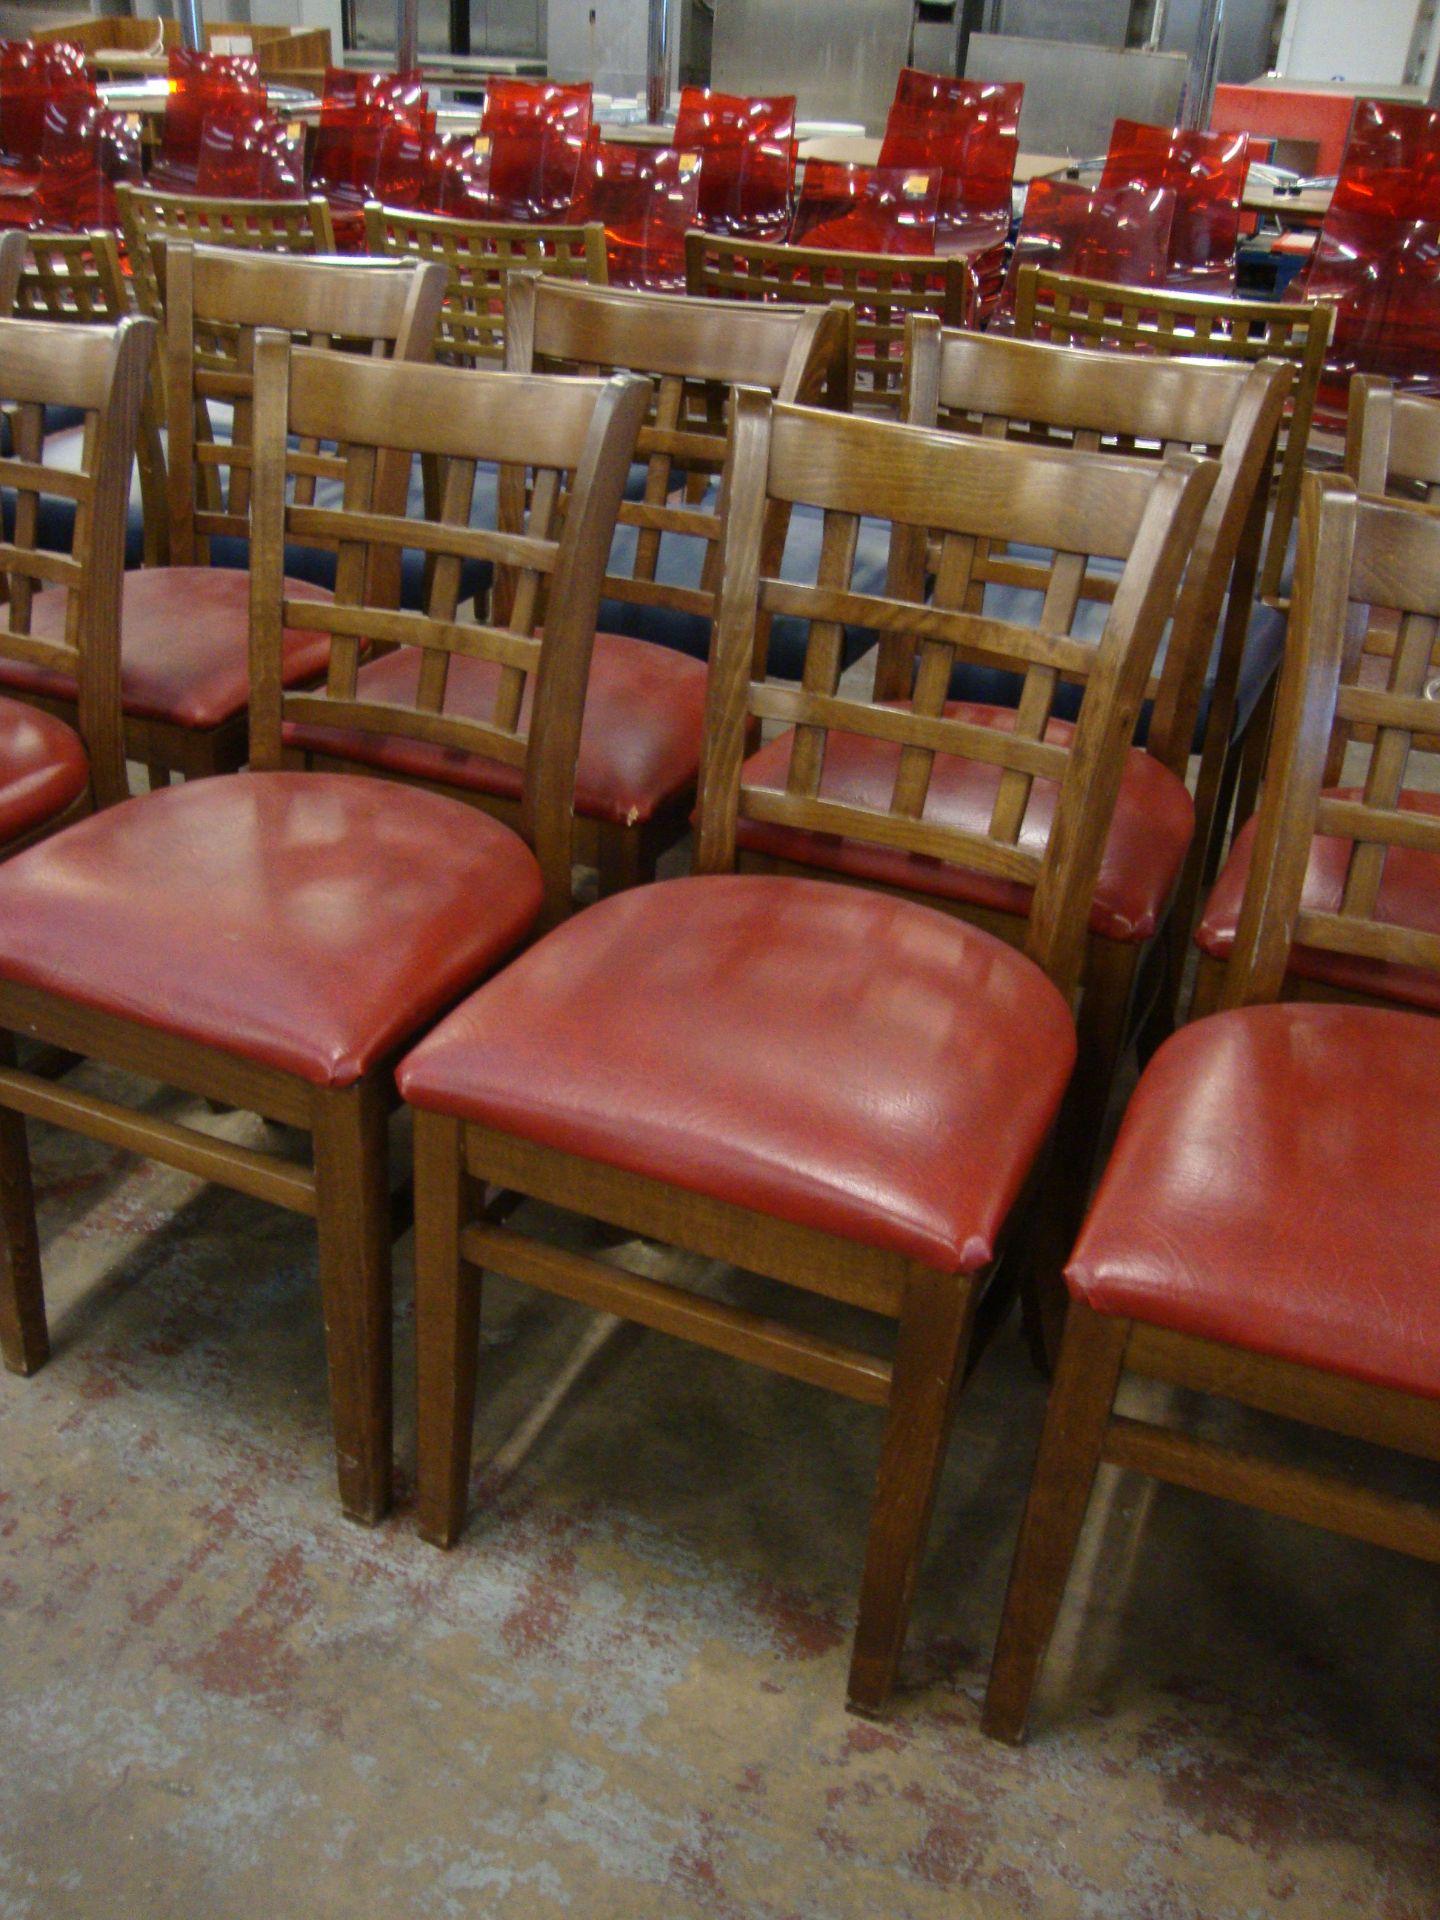 8 off wooden chairs with red upholstered bases. NB lots 121 – 129 consist of different quantities of - Image 3 of 3